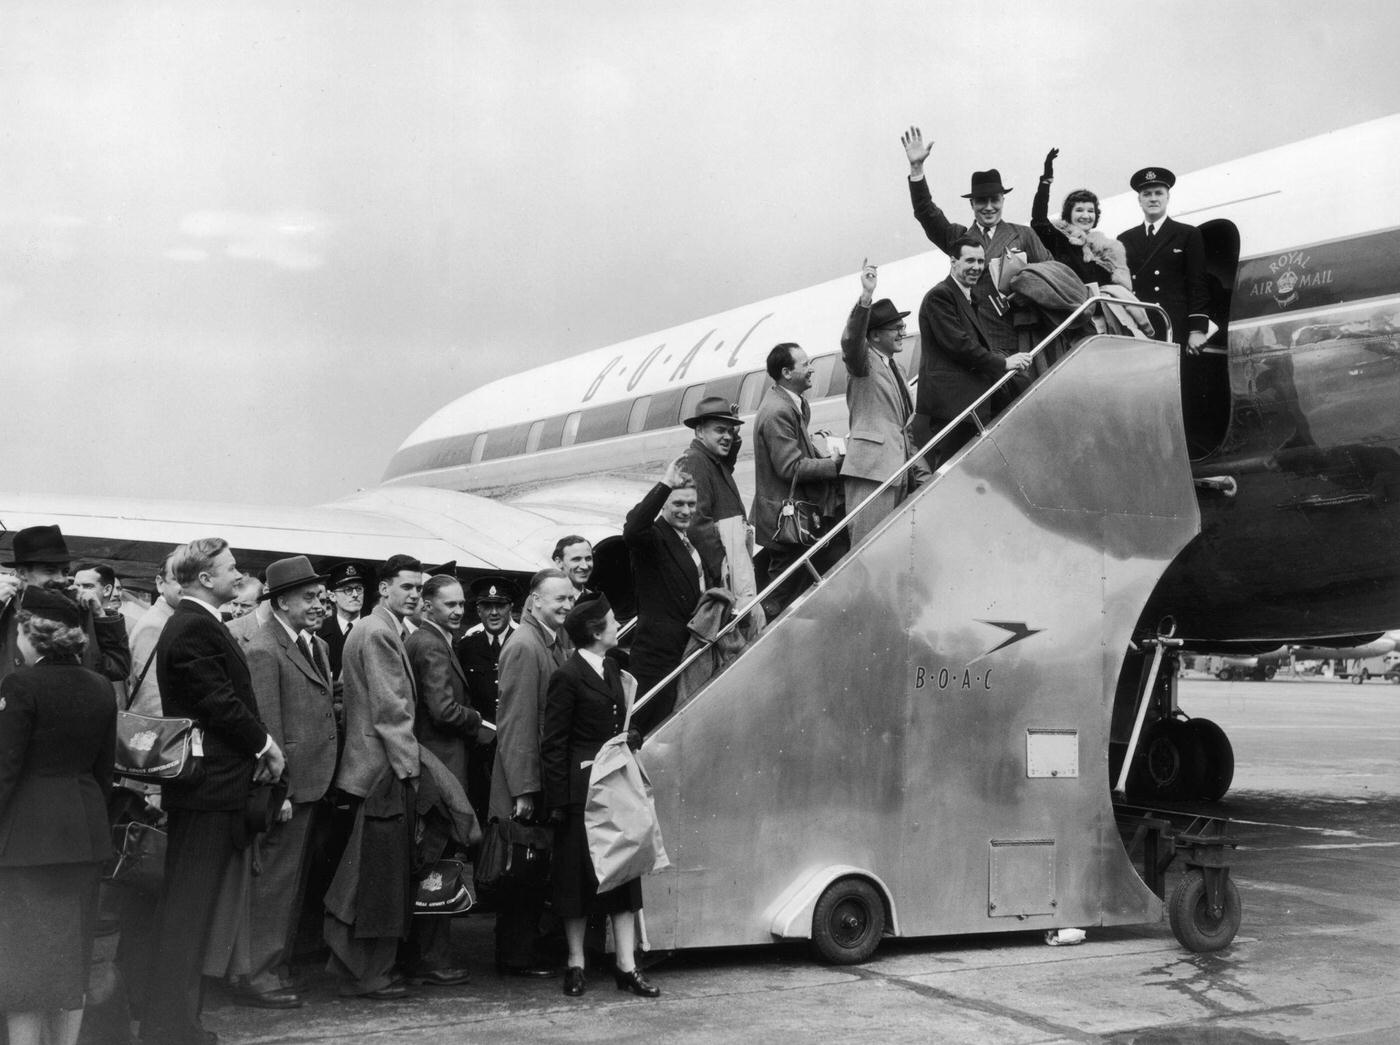 Passengers bound for Johannesburg board the inaugural British Overseas Airways Corporation (BOAC) De Havilland Comet jet airliner at London Airport, marking the world's first regular jet service.